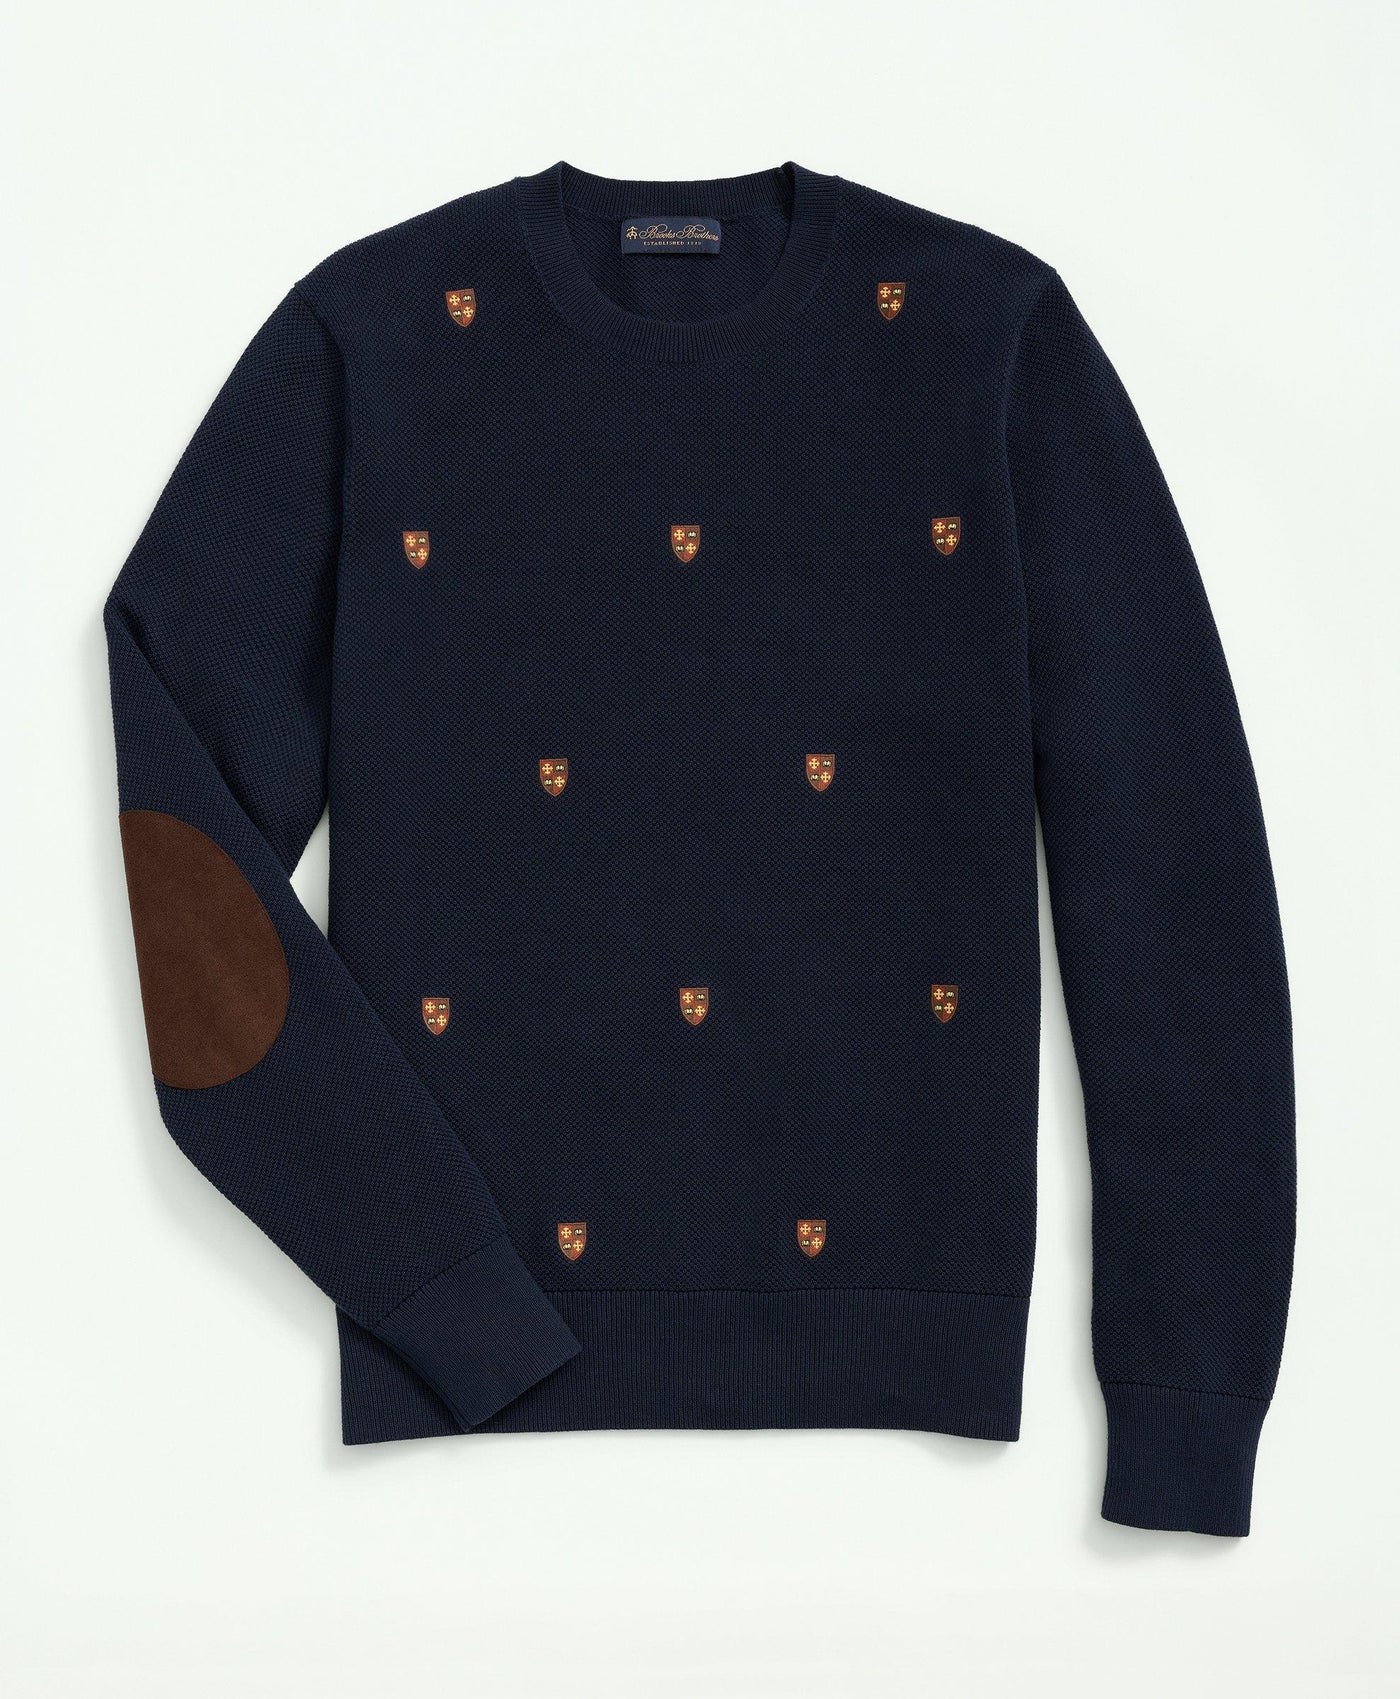 Cotton Crewneck Shield Embroidered Sweater